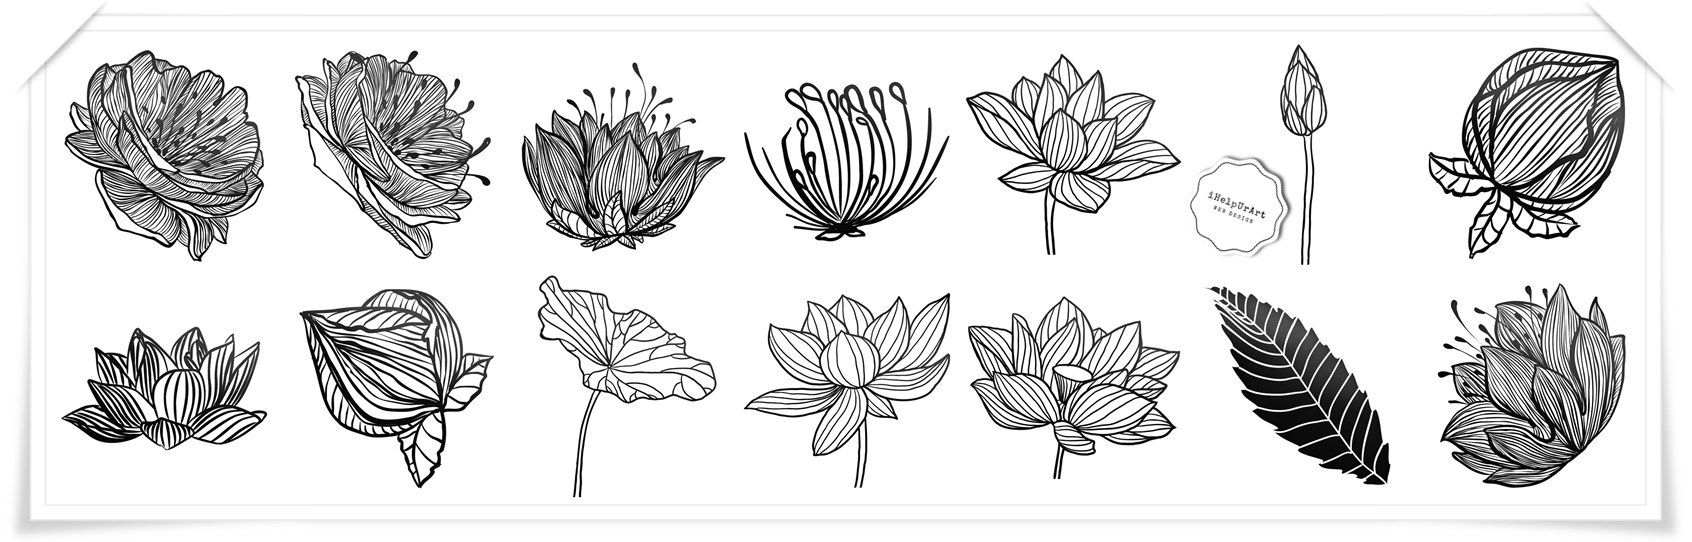 Black and White Sketchy Flowers (103936) | Objects | Design Bundles